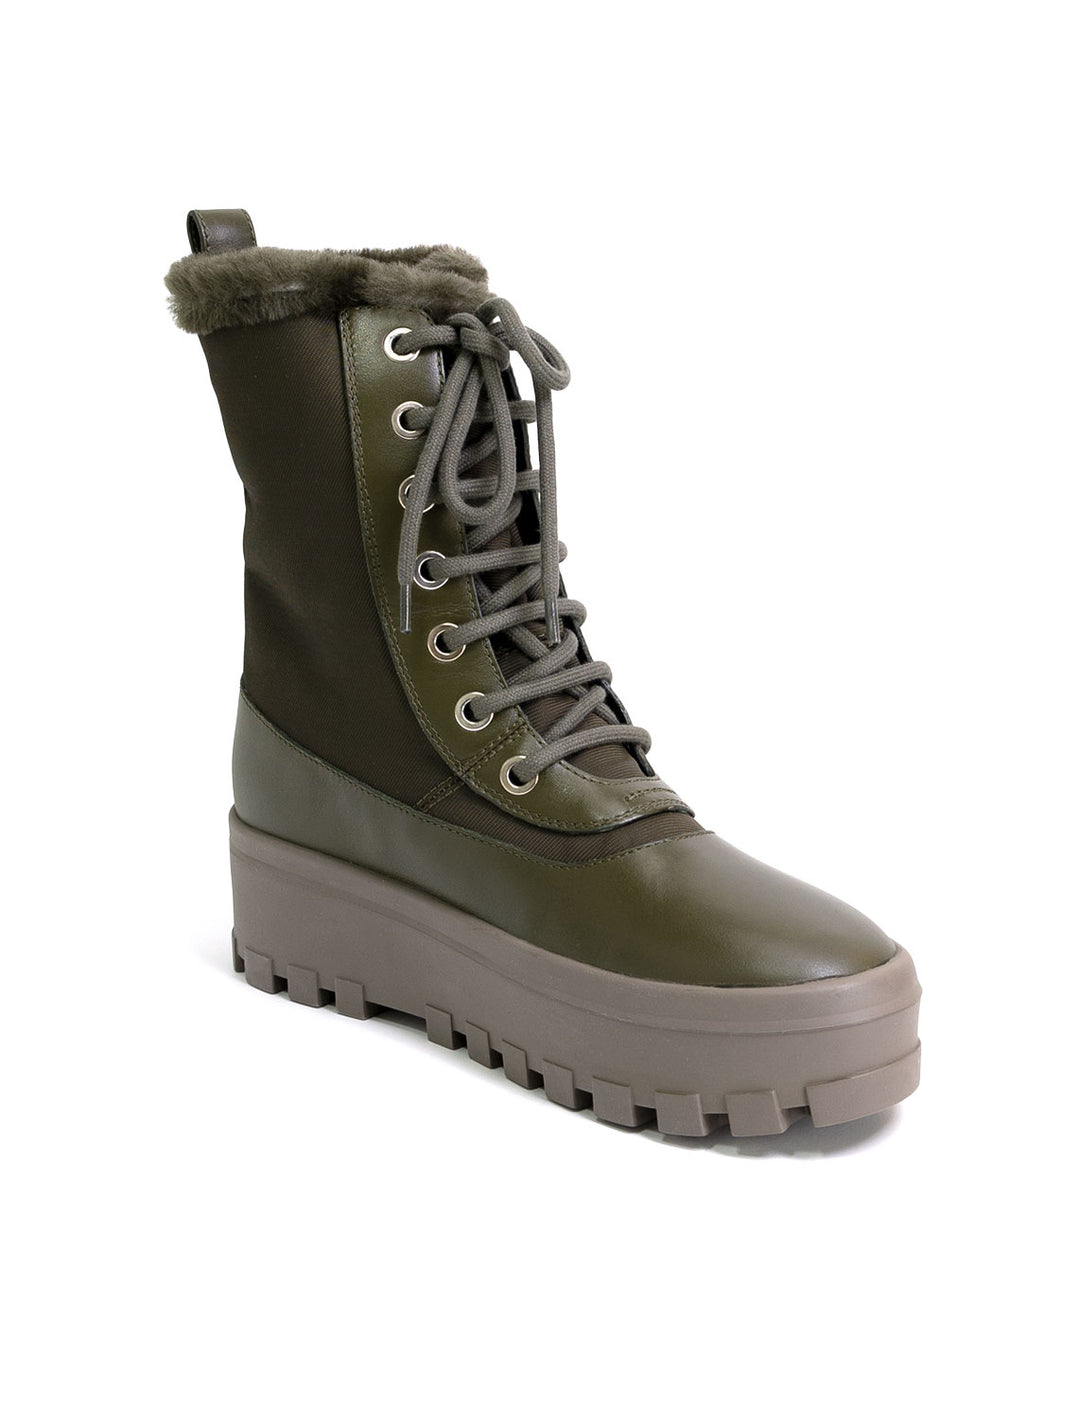 Front angle view of Mackage's hero boots in army.